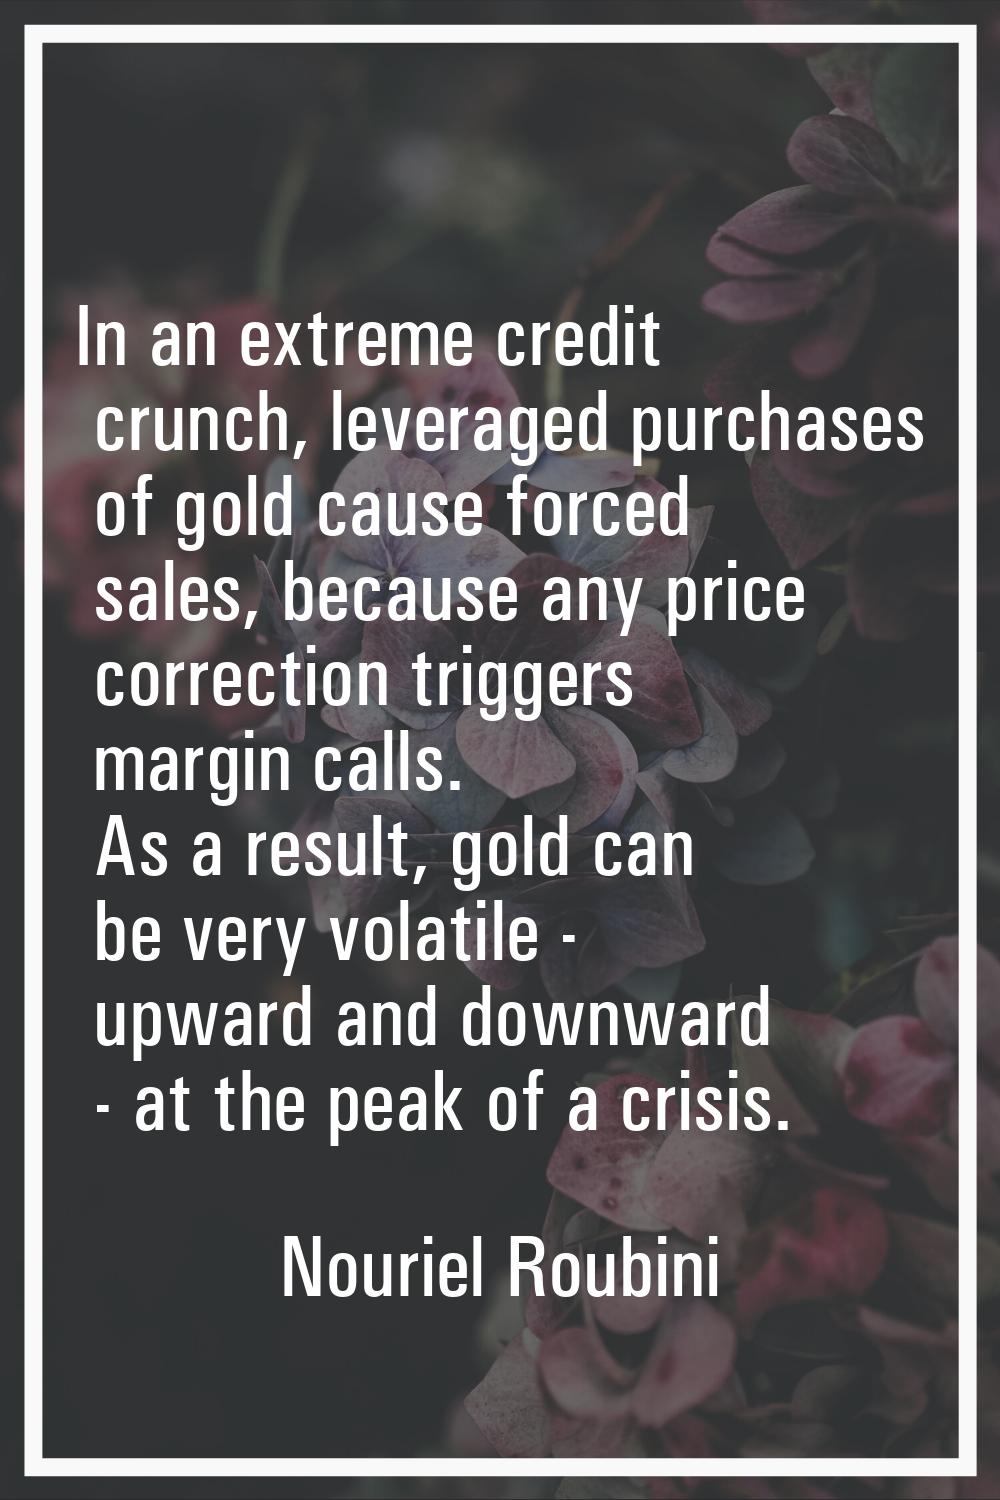 In an extreme credit crunch, leveraged purchases of gold cause forced sales, because any price corr